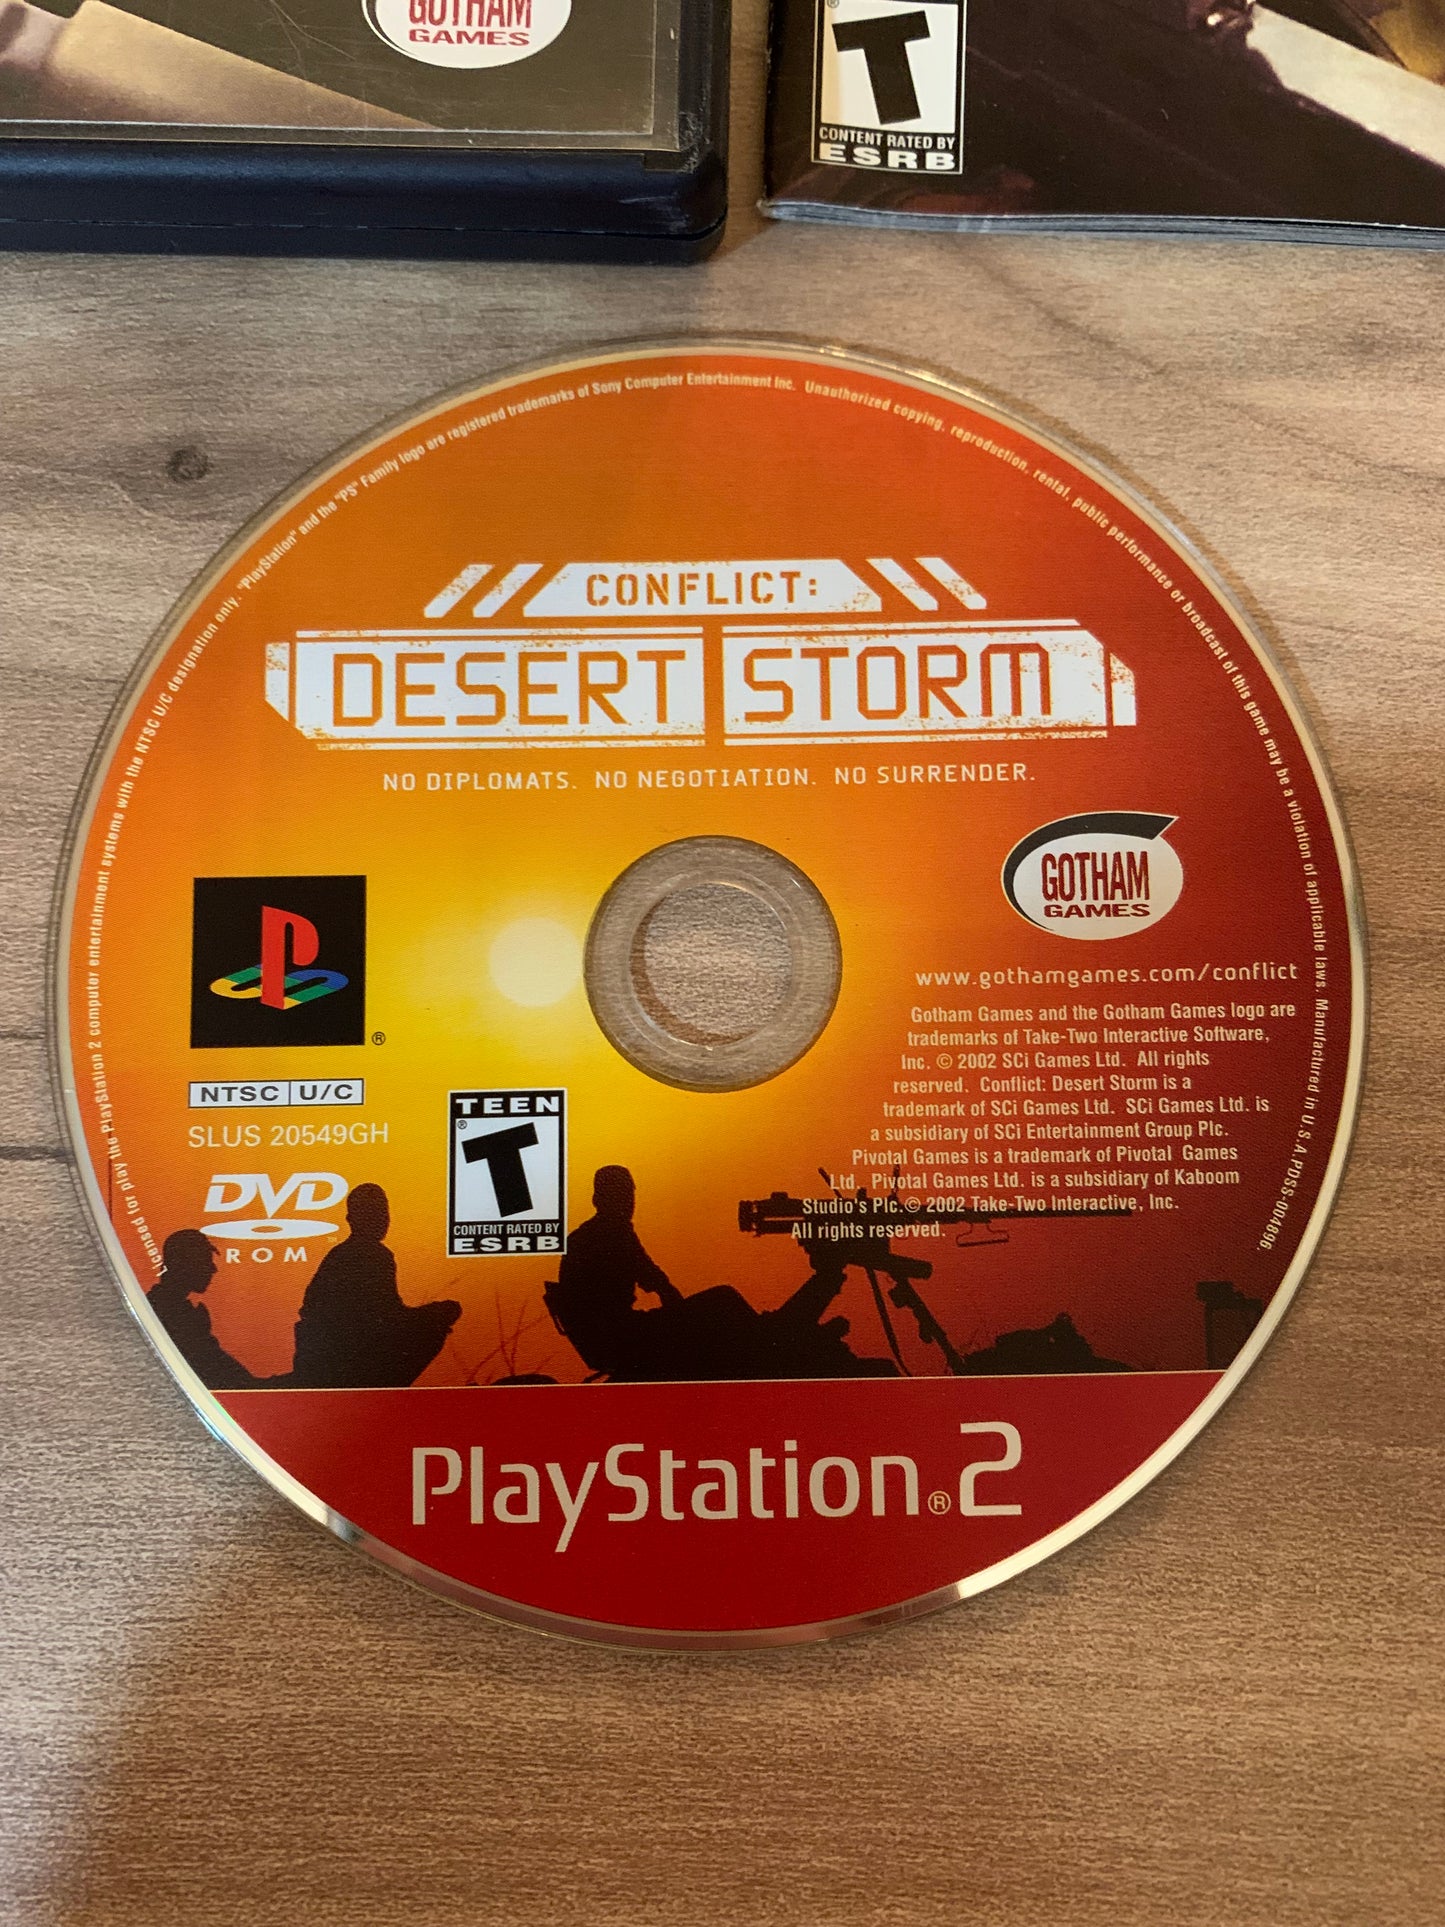 SONY PLAYSTATiON 2 [PS2] | CONFLiCT DESERT STORM